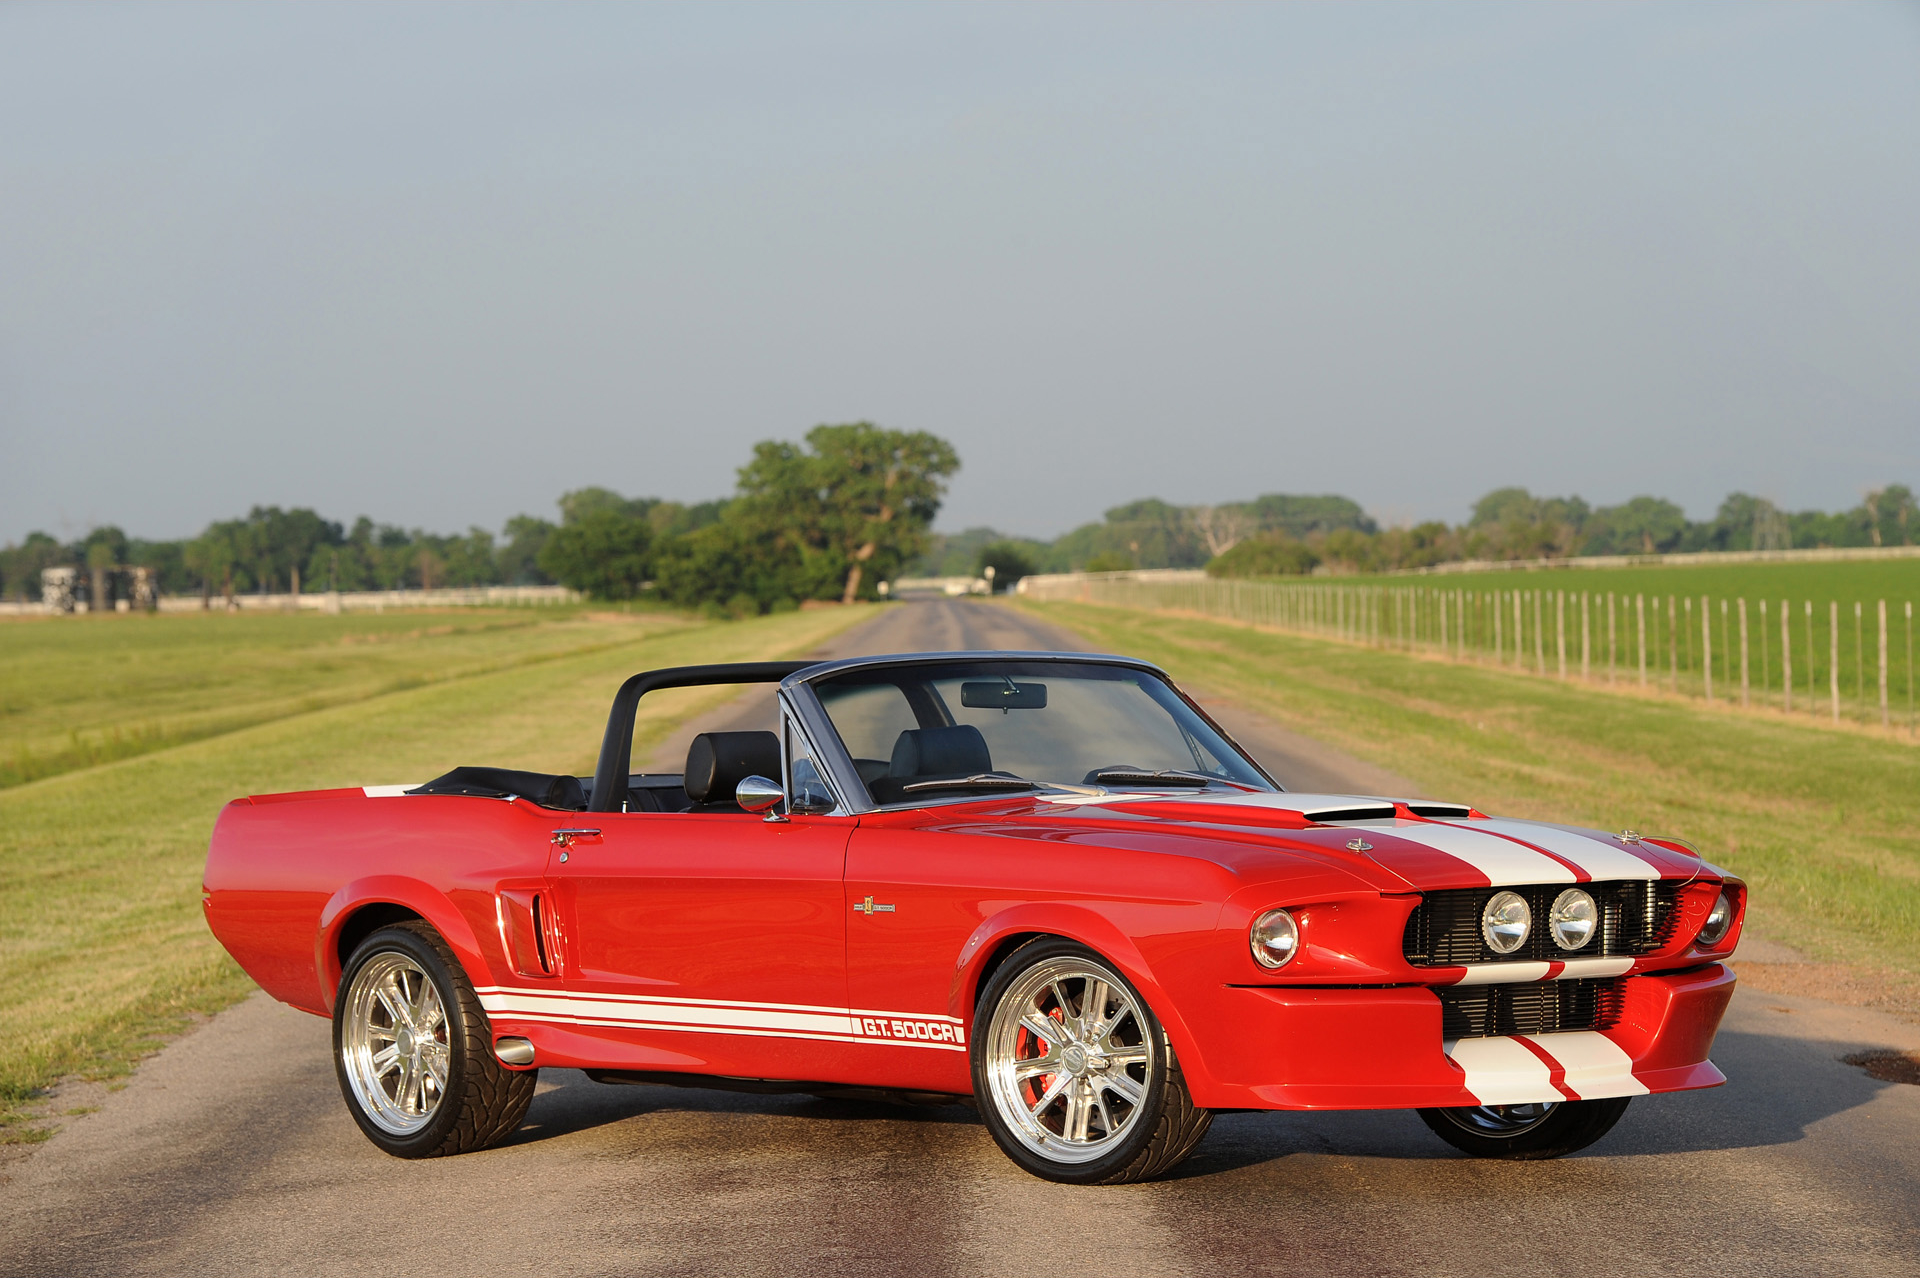 Free HD vehicles, shelby gt500 classic recreation, classic car, convertible, muscle car, ford